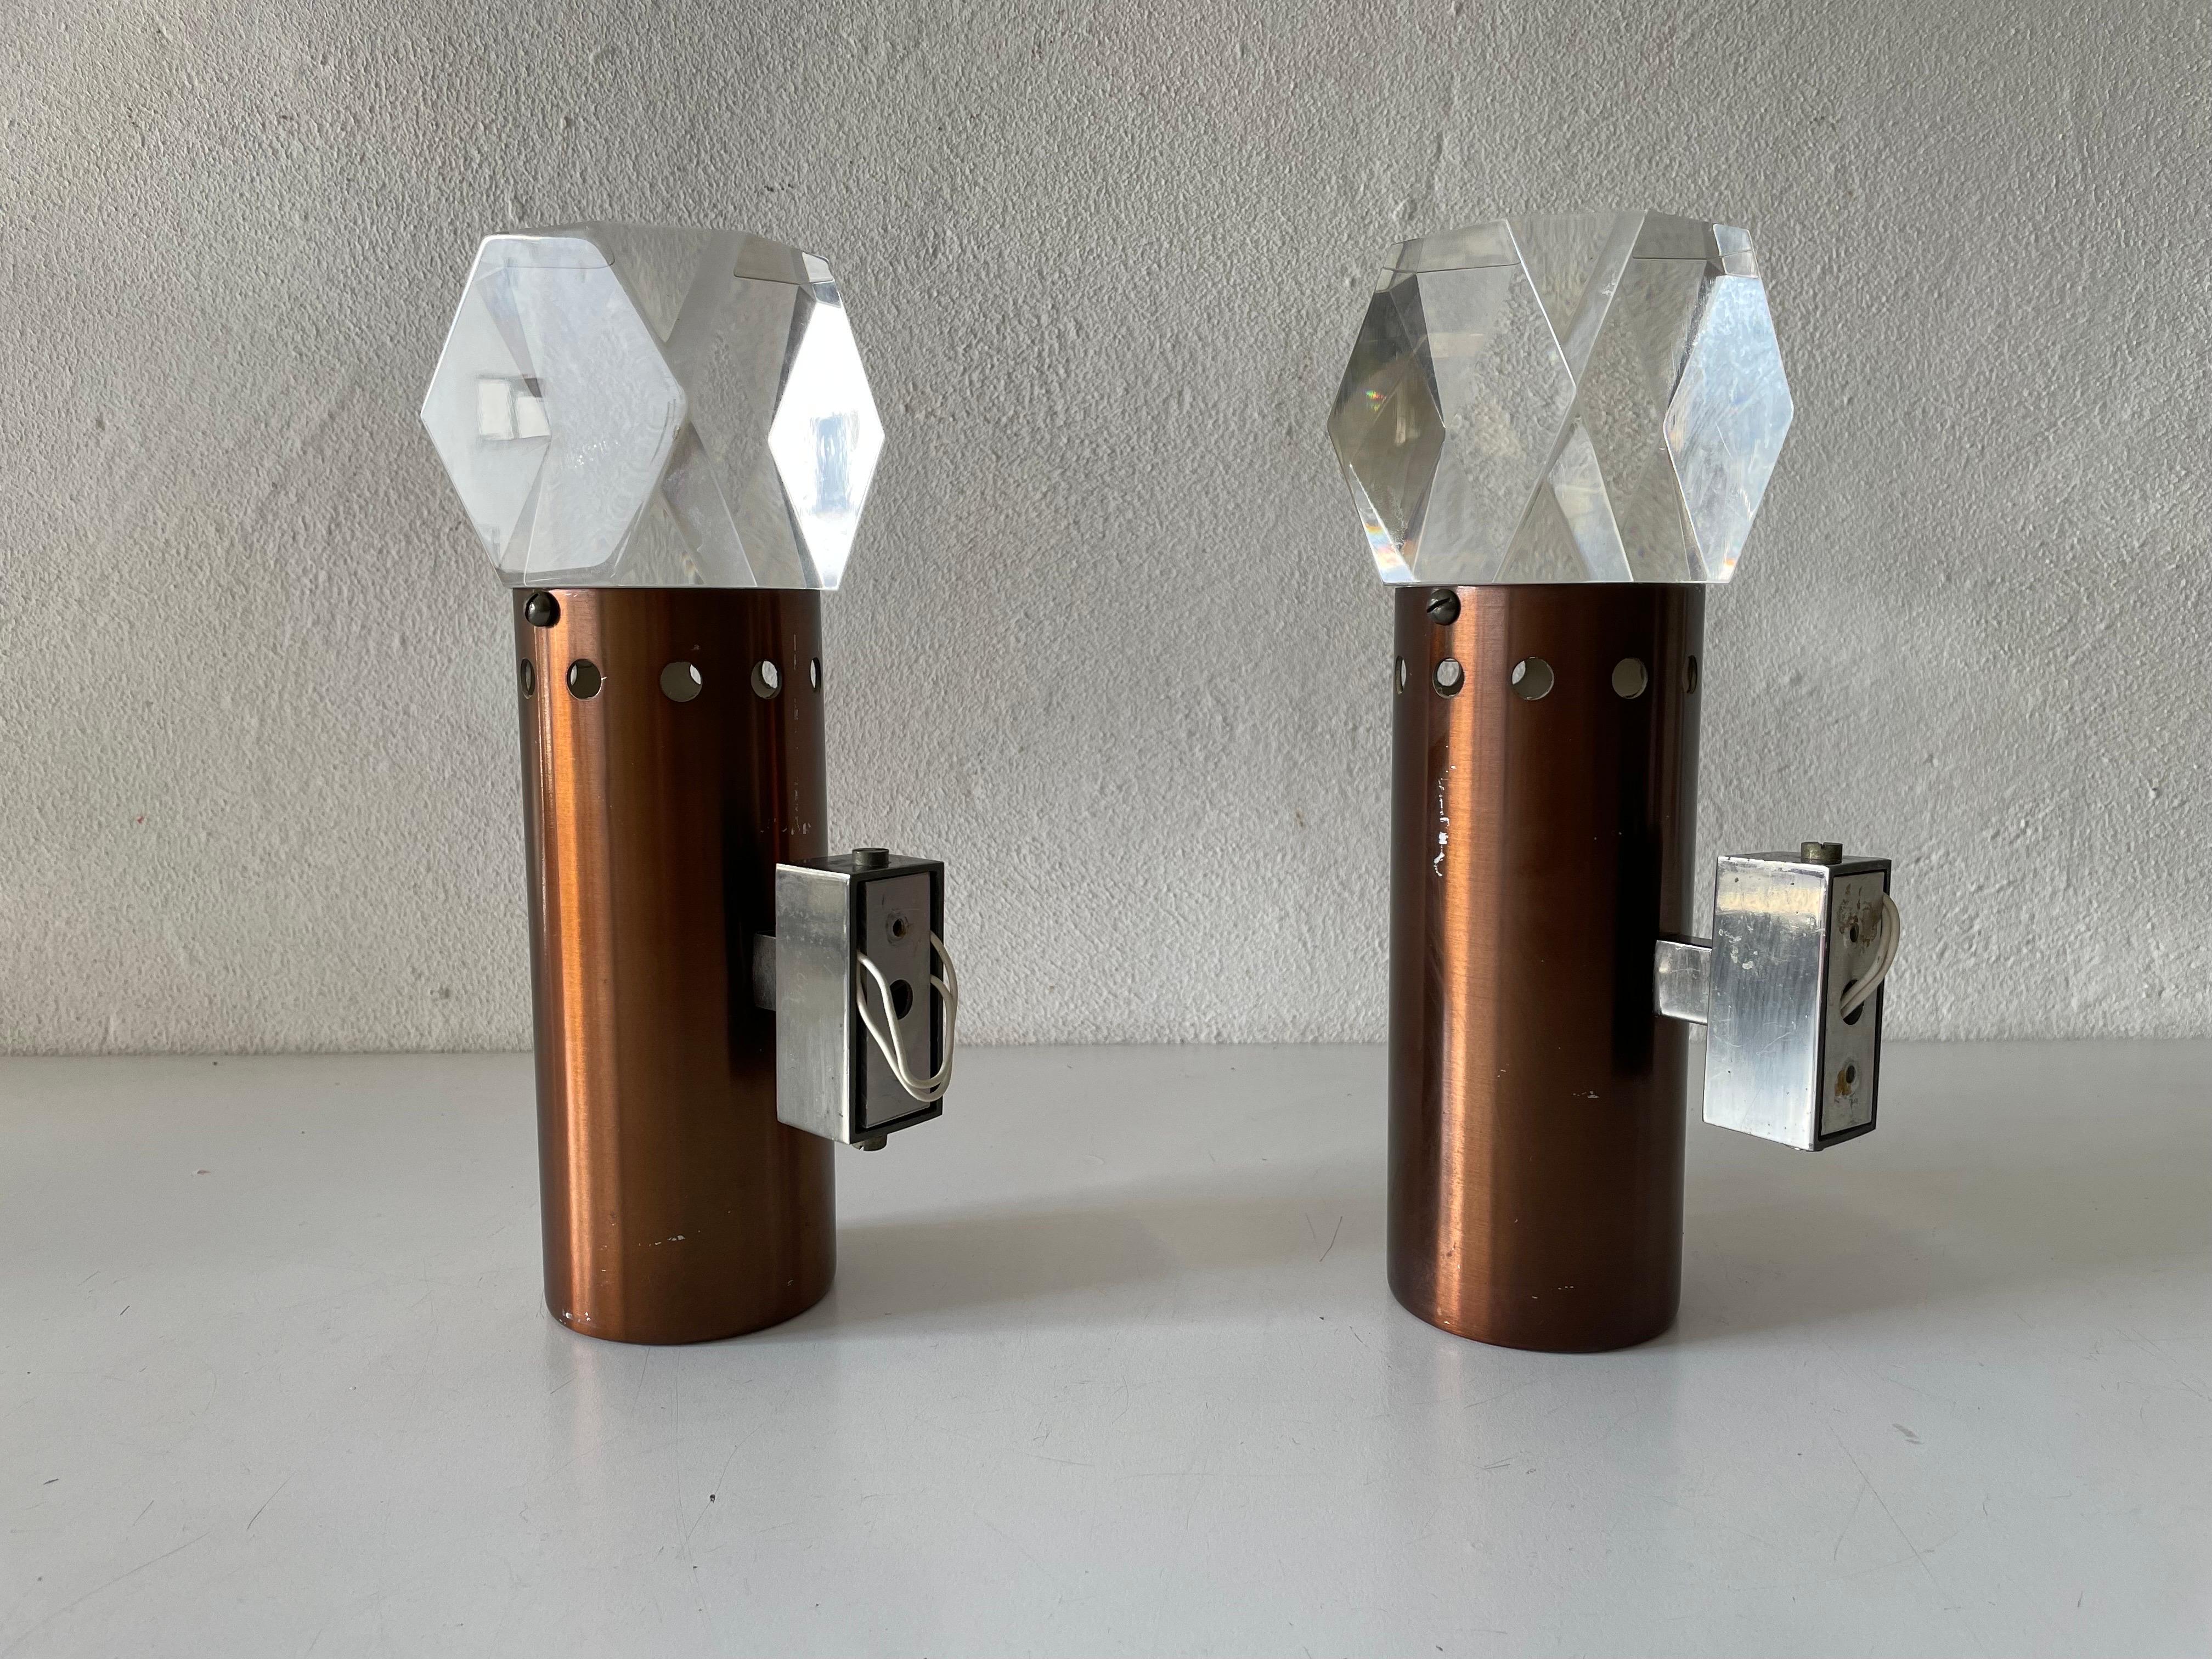 Rare Copper and Glass Sculptural Pair of Sconces by Stilux Milano, 1960s, Italy

Very elegant and Minimalist wall lamps
Lamp is in very good condition.

These lamps works with E27 standard light bulbs. 
Wired and suitable to use in all countries.